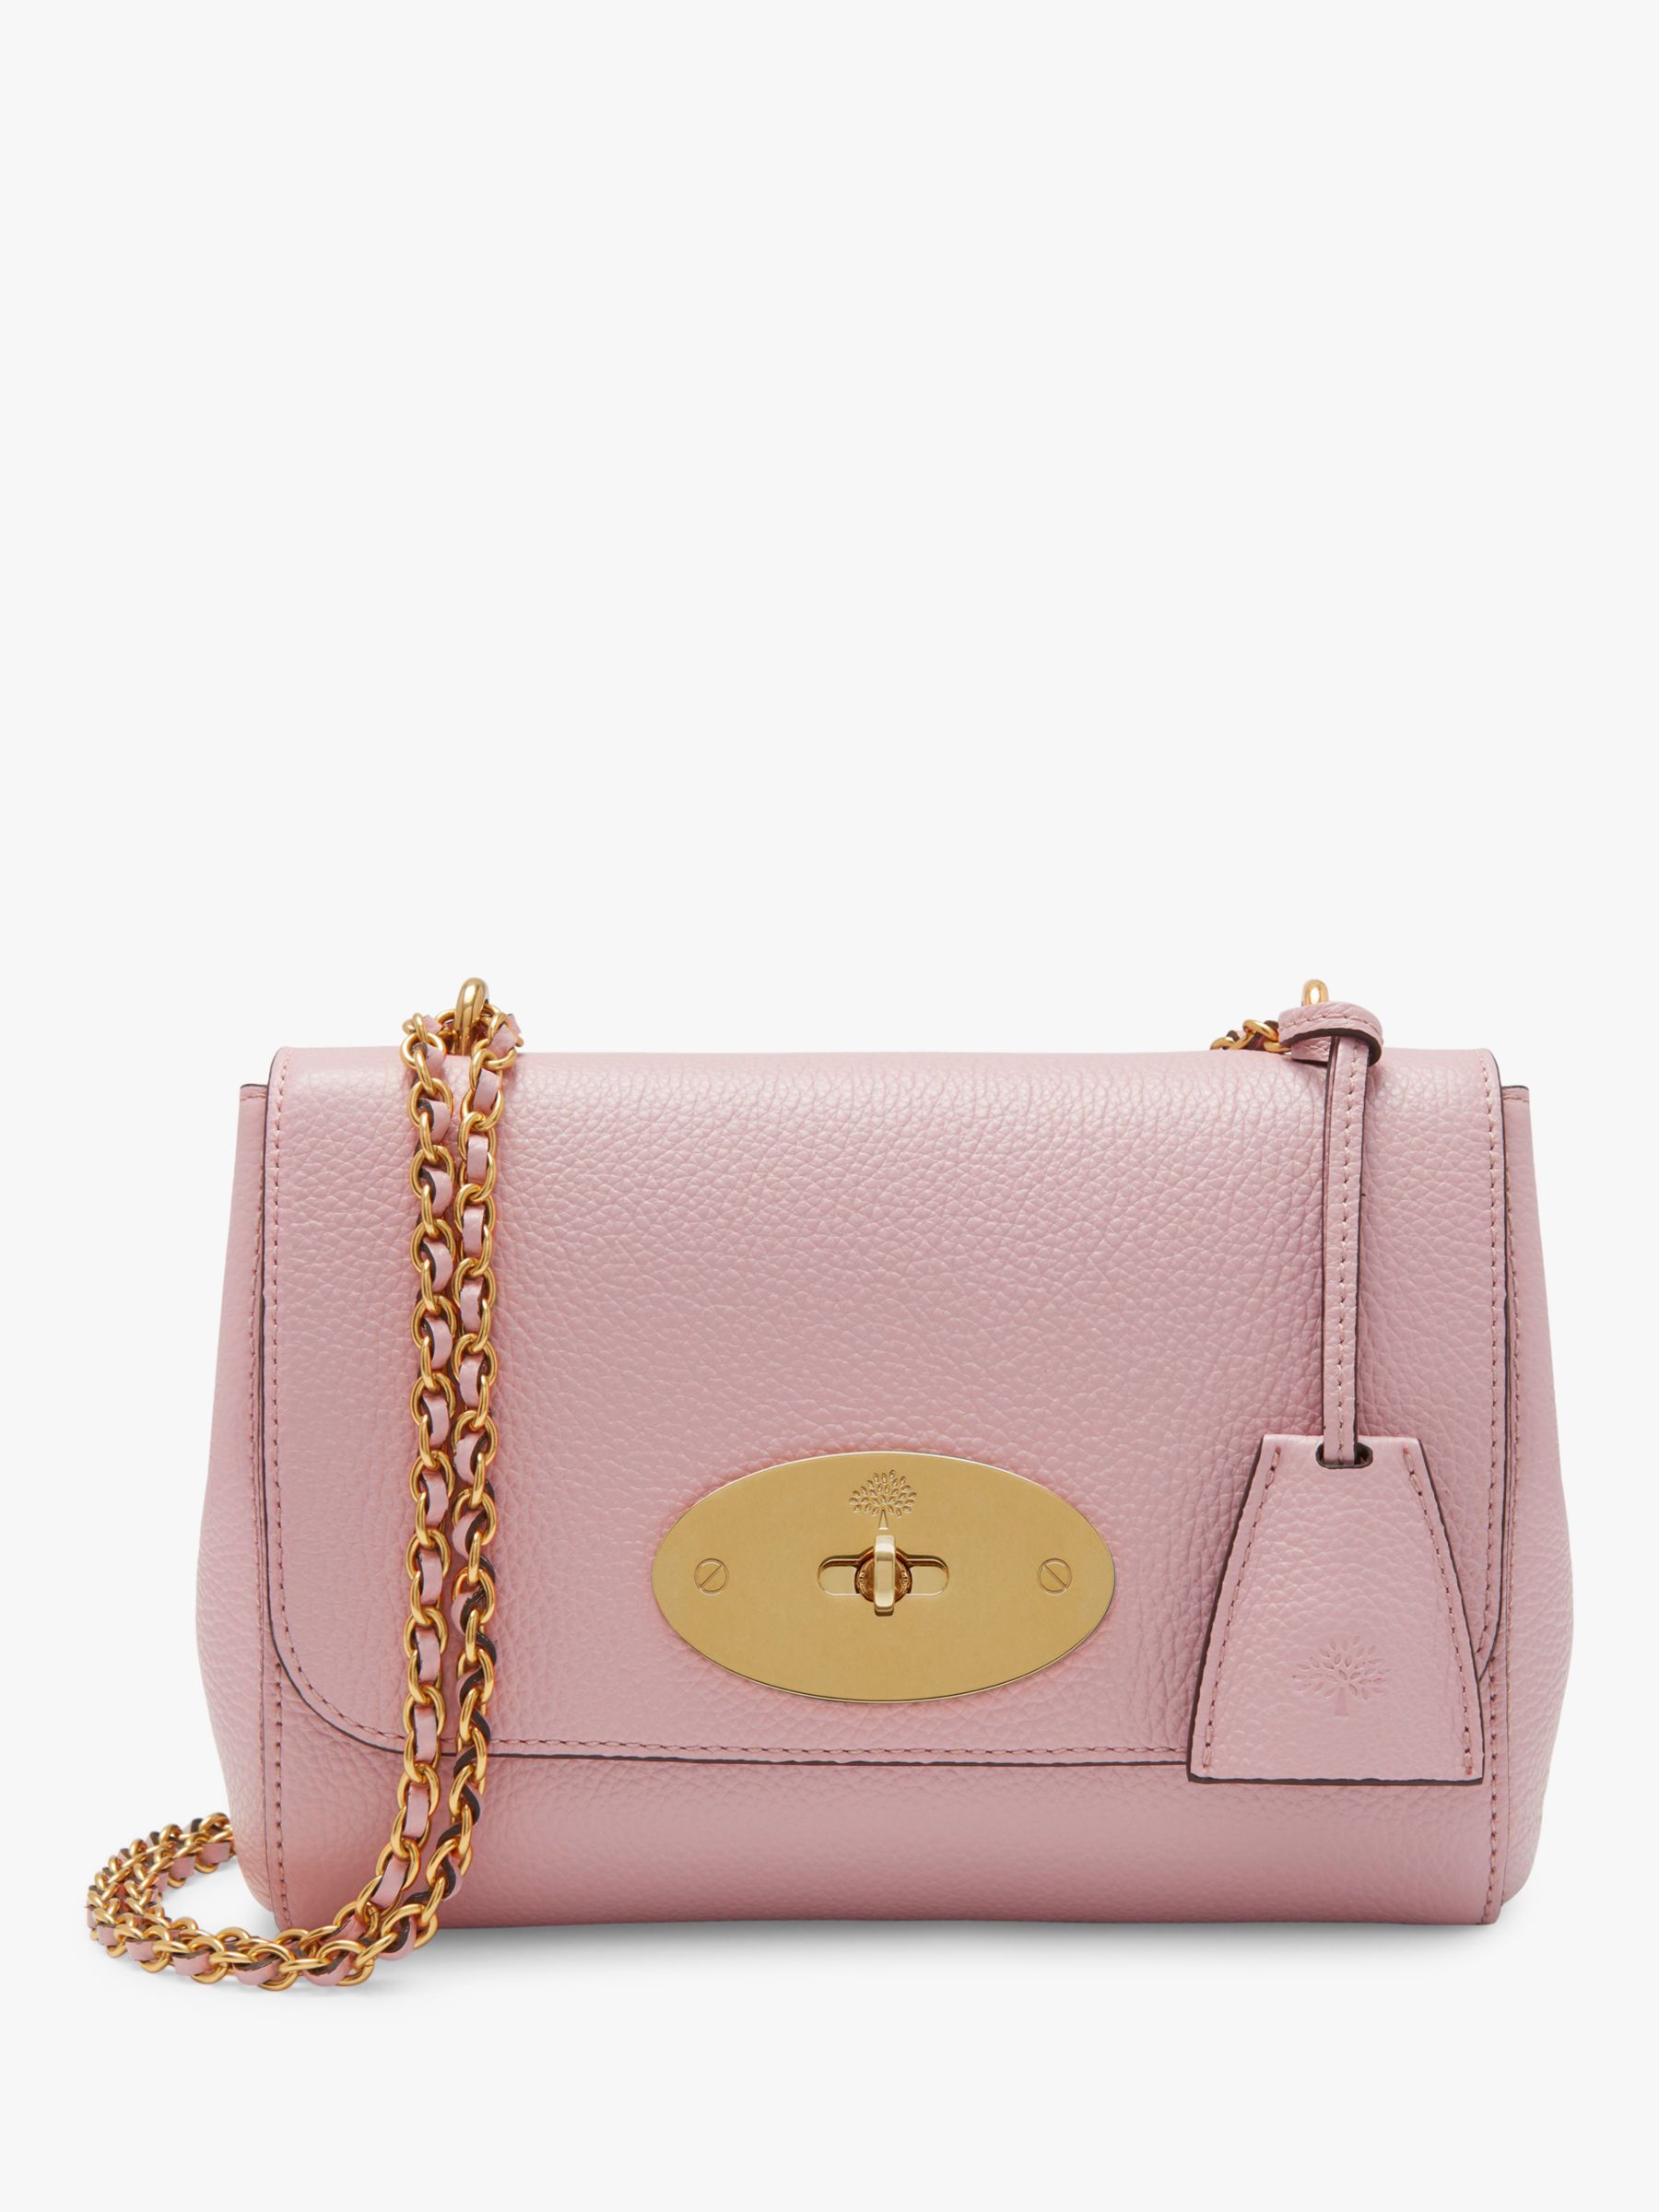 Mulberry Lily Classic Grain Leather Shoulder Bag, Powder Pink at John ...